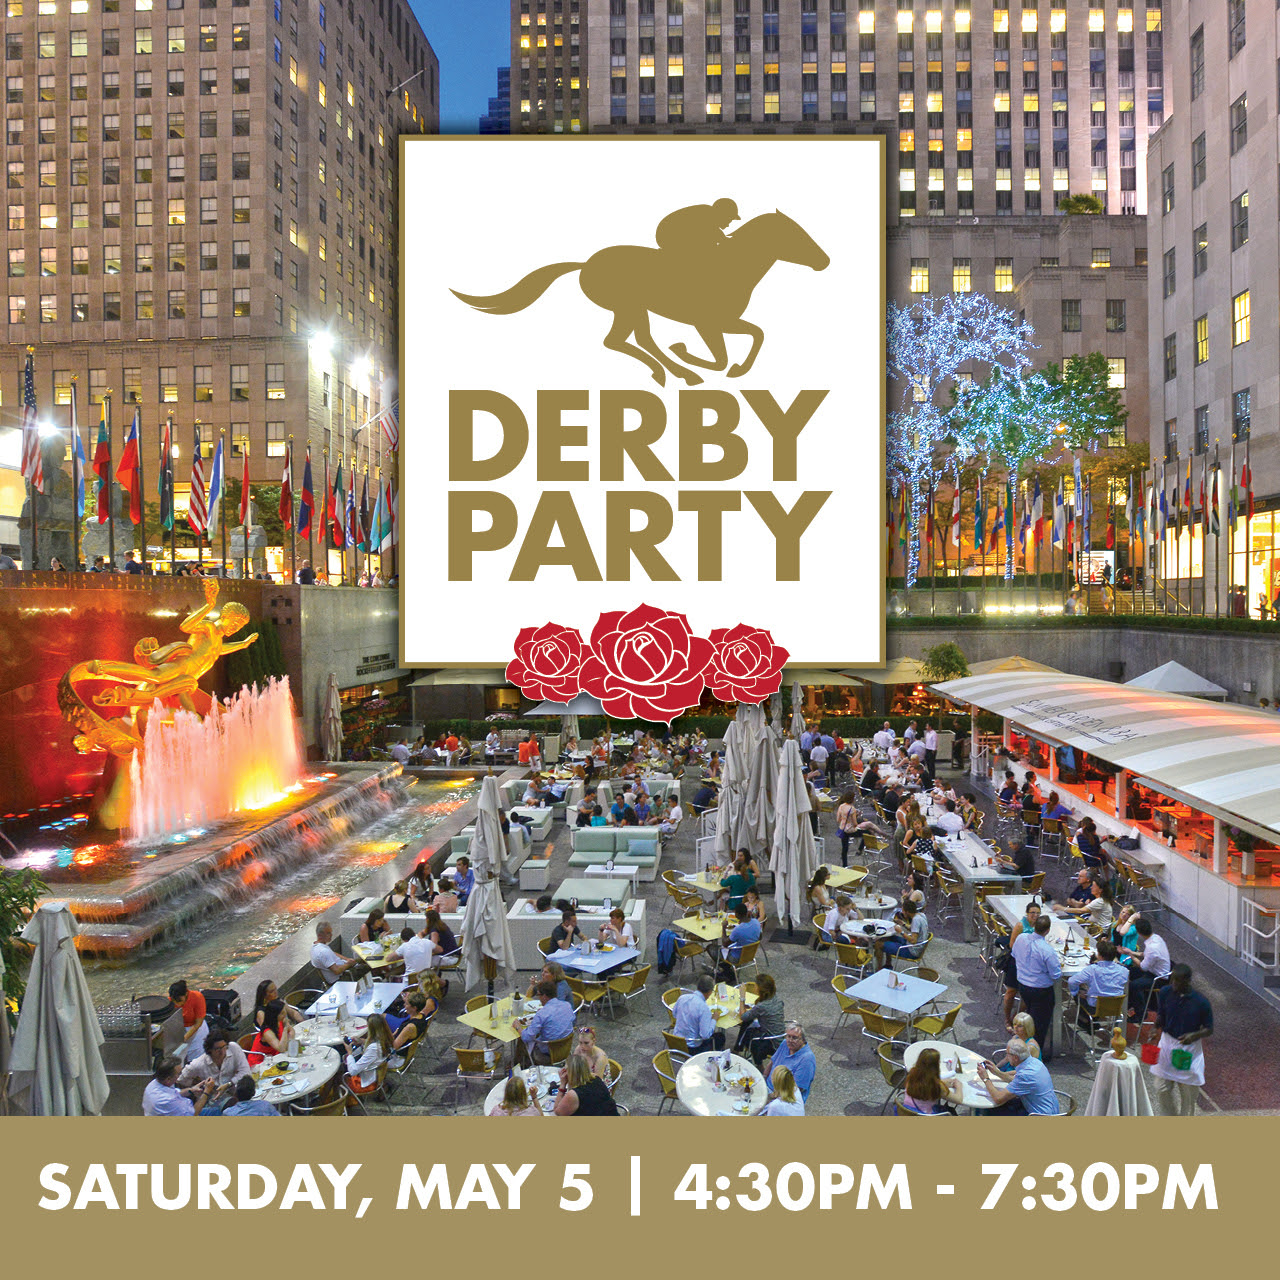 Derby Party | Saturday May 5 4:30PM - 7:30PM